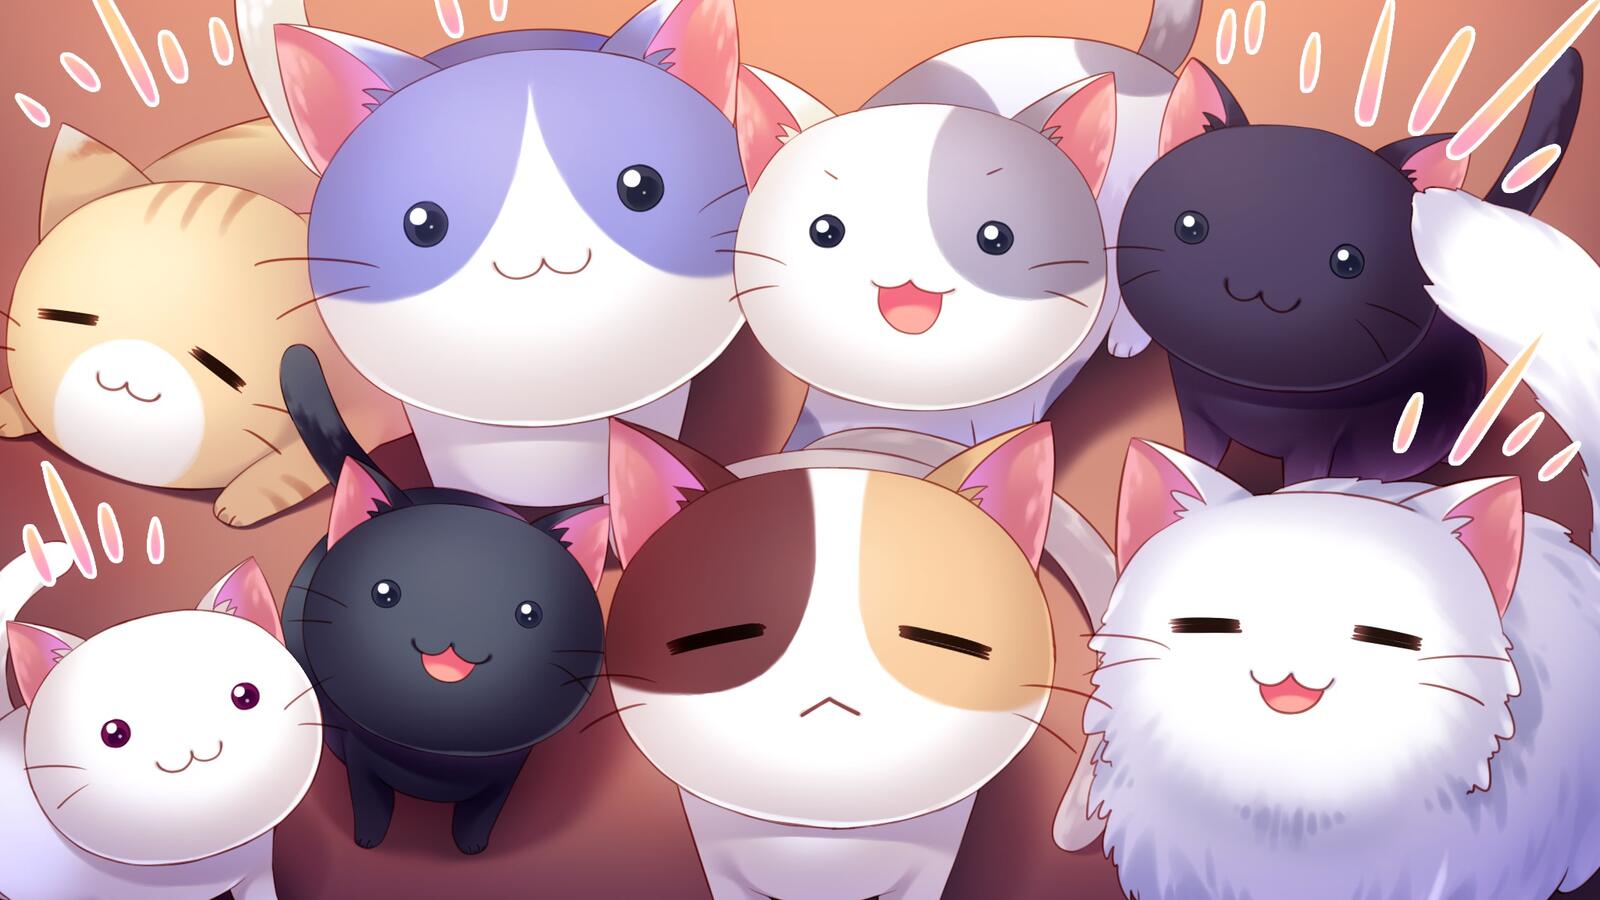 Wallpapers animals an anime cat on the desktop